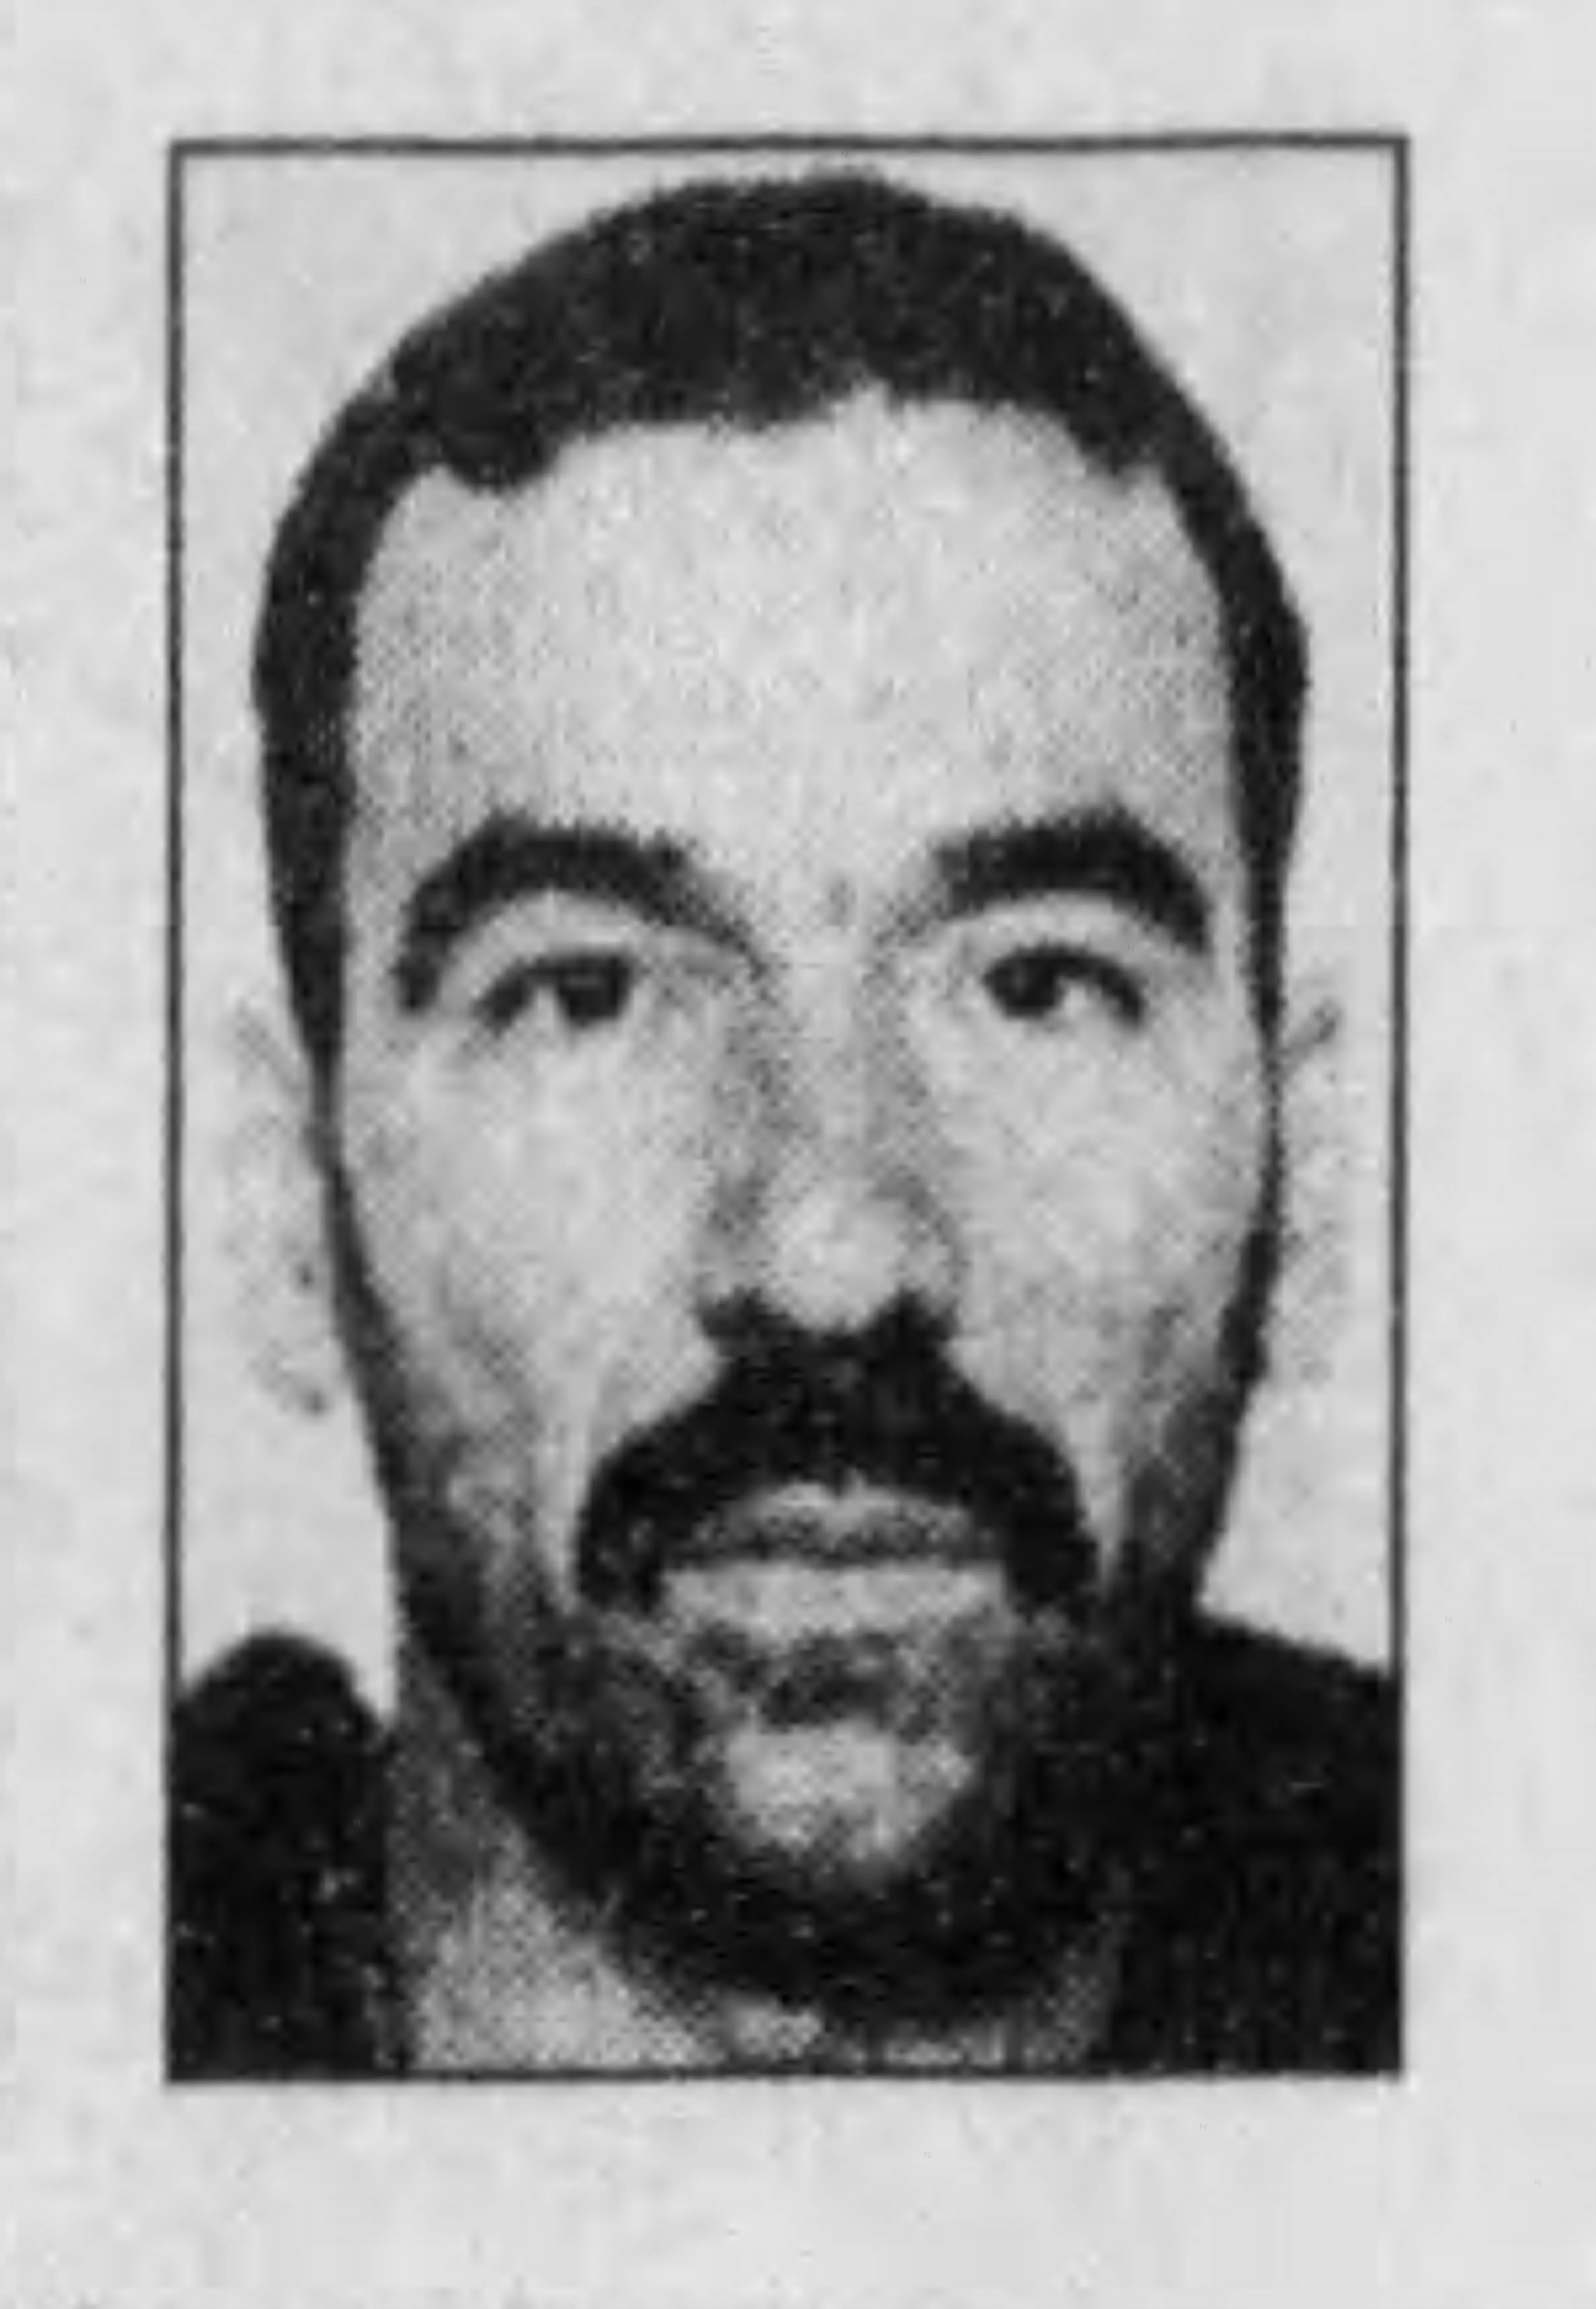 Anthony E. Marrero, one of Rogers' victims, is shown in a May 31, 2001, edition of The Inquirer.